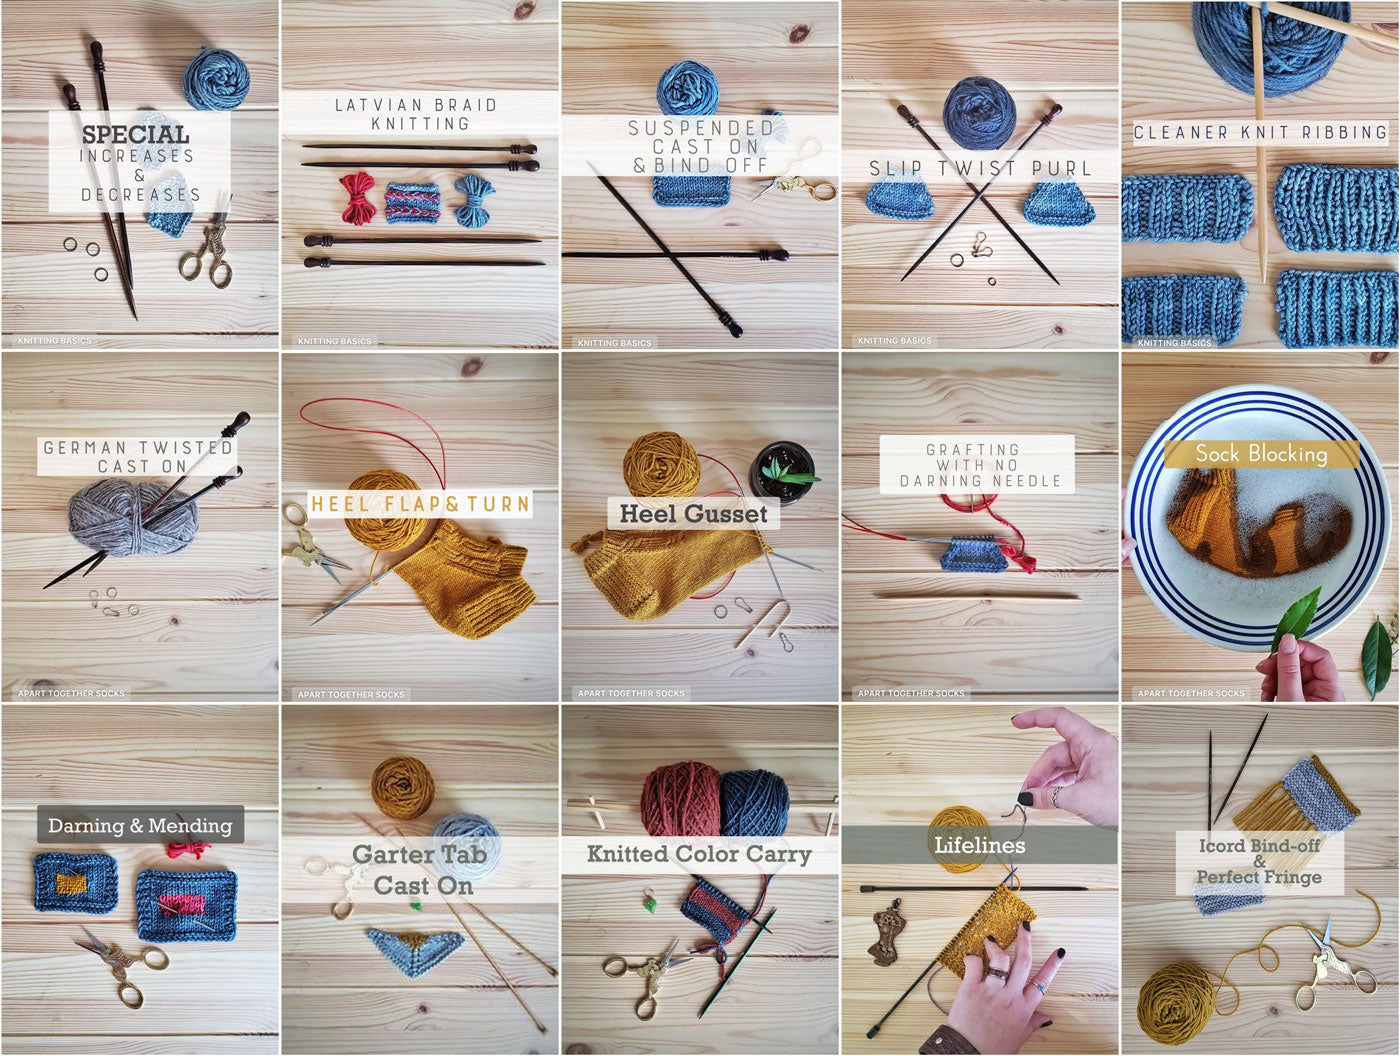 A tiled image of screenshots from 15 different knitting tutorials.